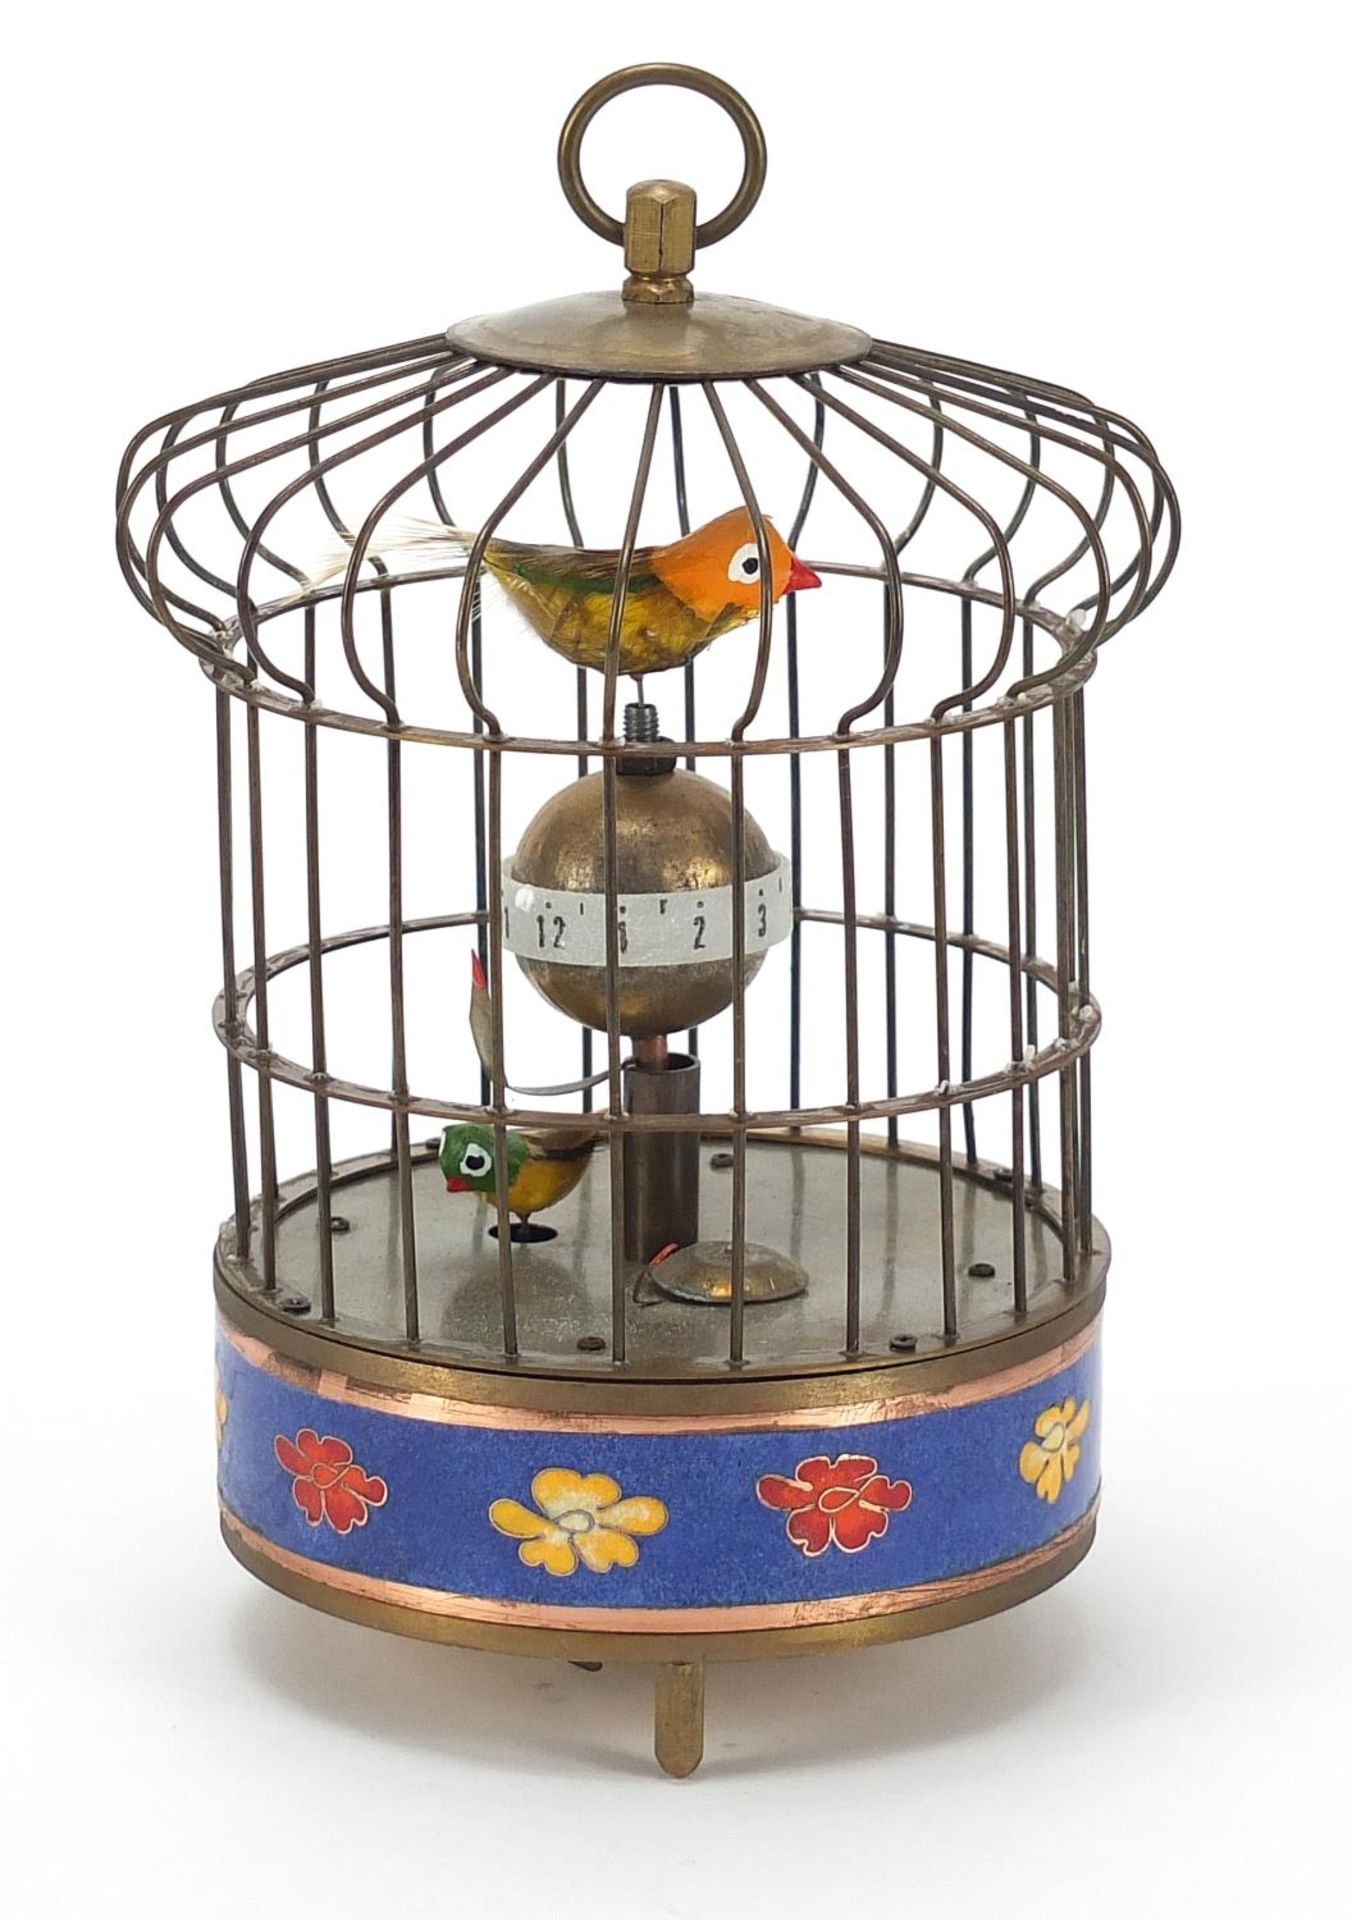 Clockwork automaton bird cage alarm clock, 20cm high :For Further Condition Reports Please Visit Our